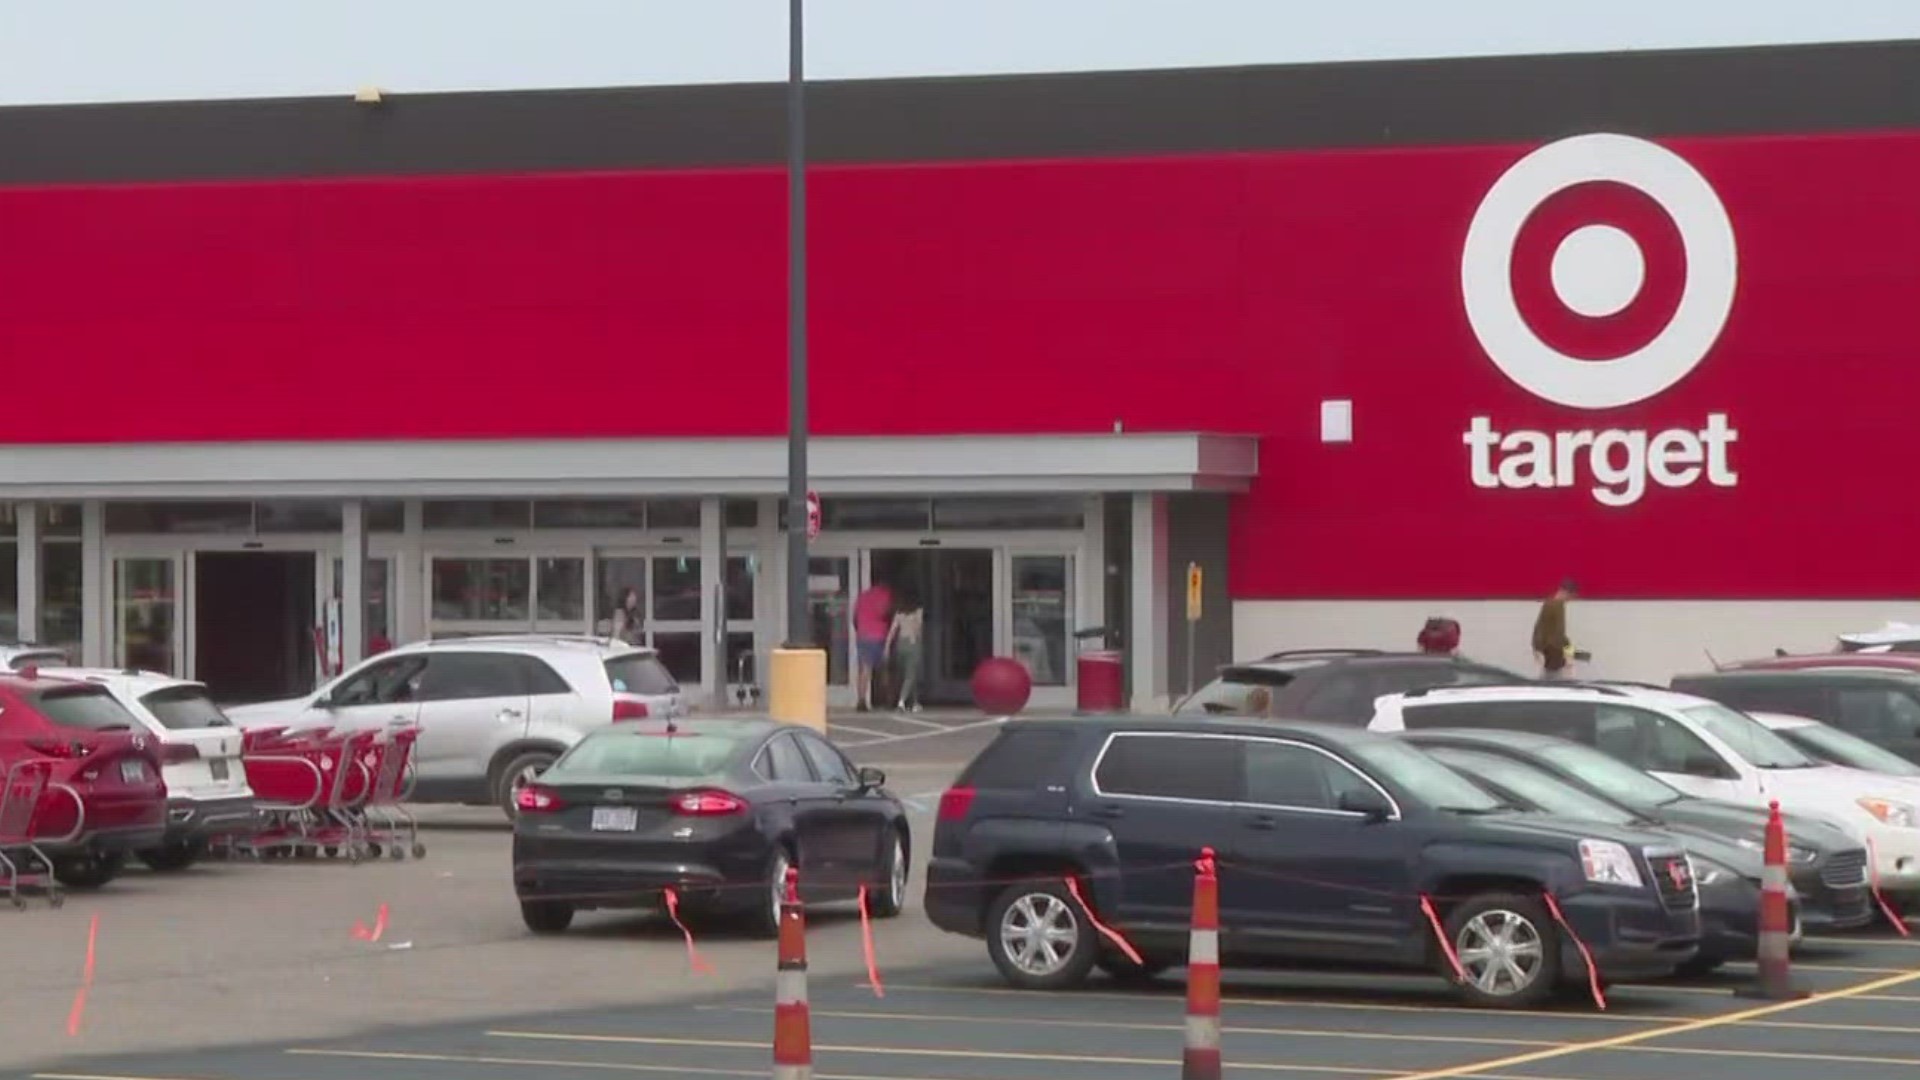 Woman shares alleged violating experience at Alpine Target wzzm13